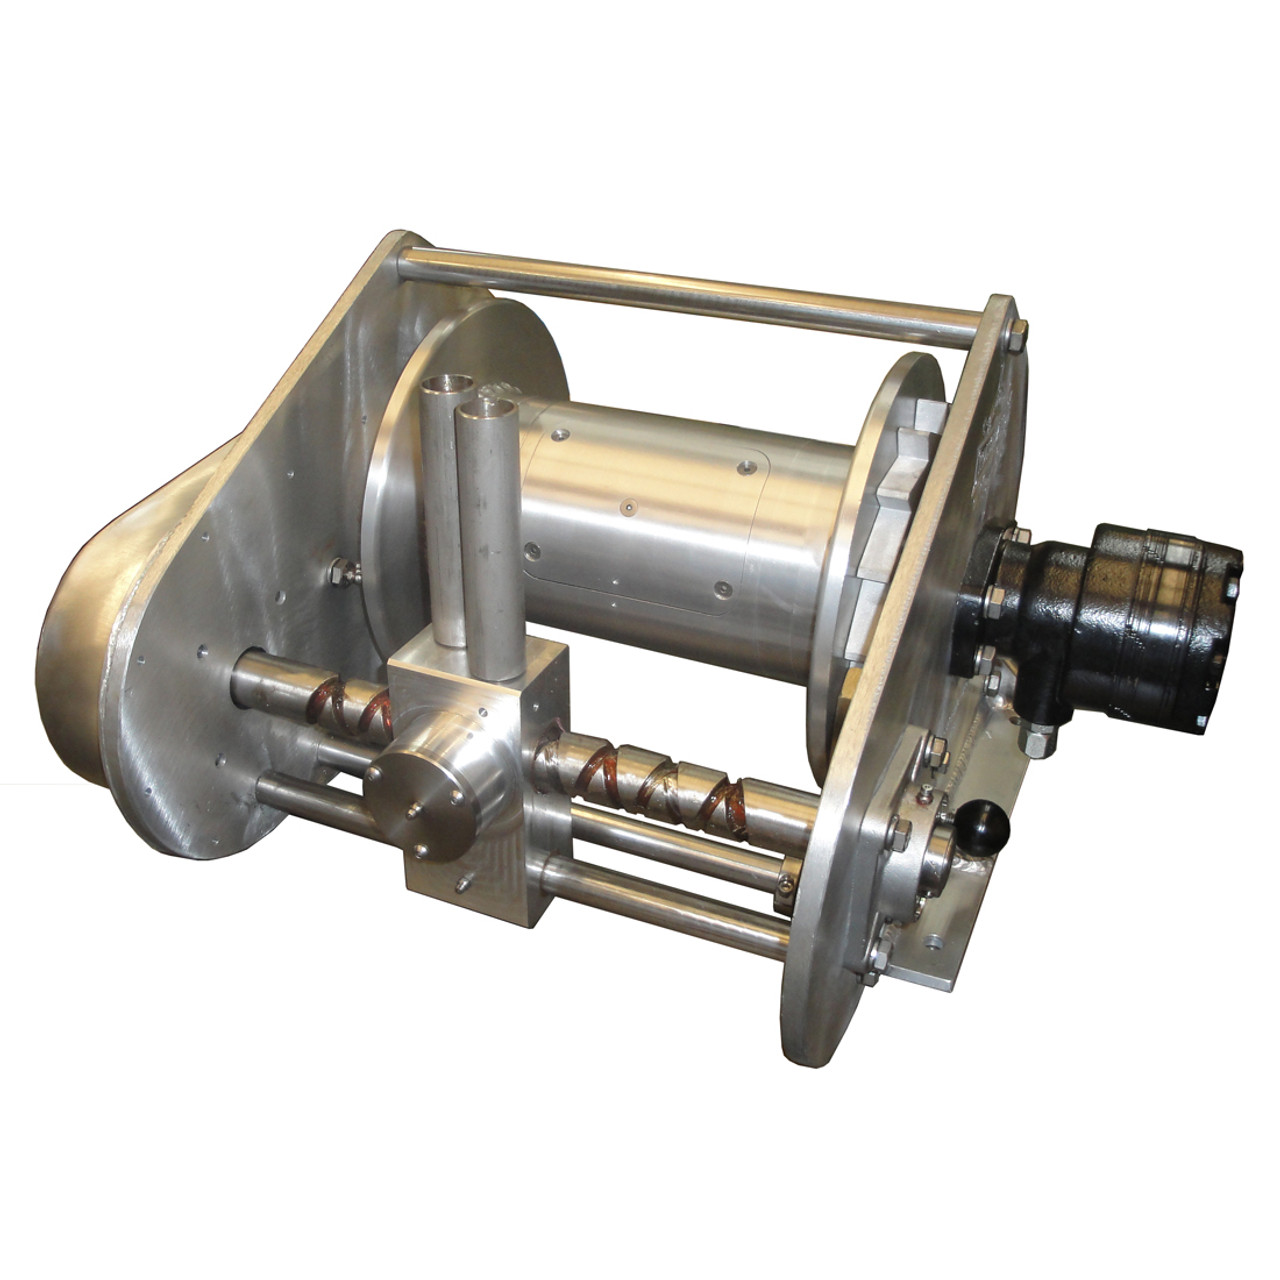 Kolstrand AKPW12D12W-ULW special aluminum winch with diamond screw level wind and larger drum core with slip-ring access-with manual drum ratchet and dog-no hydraulic brake assembly